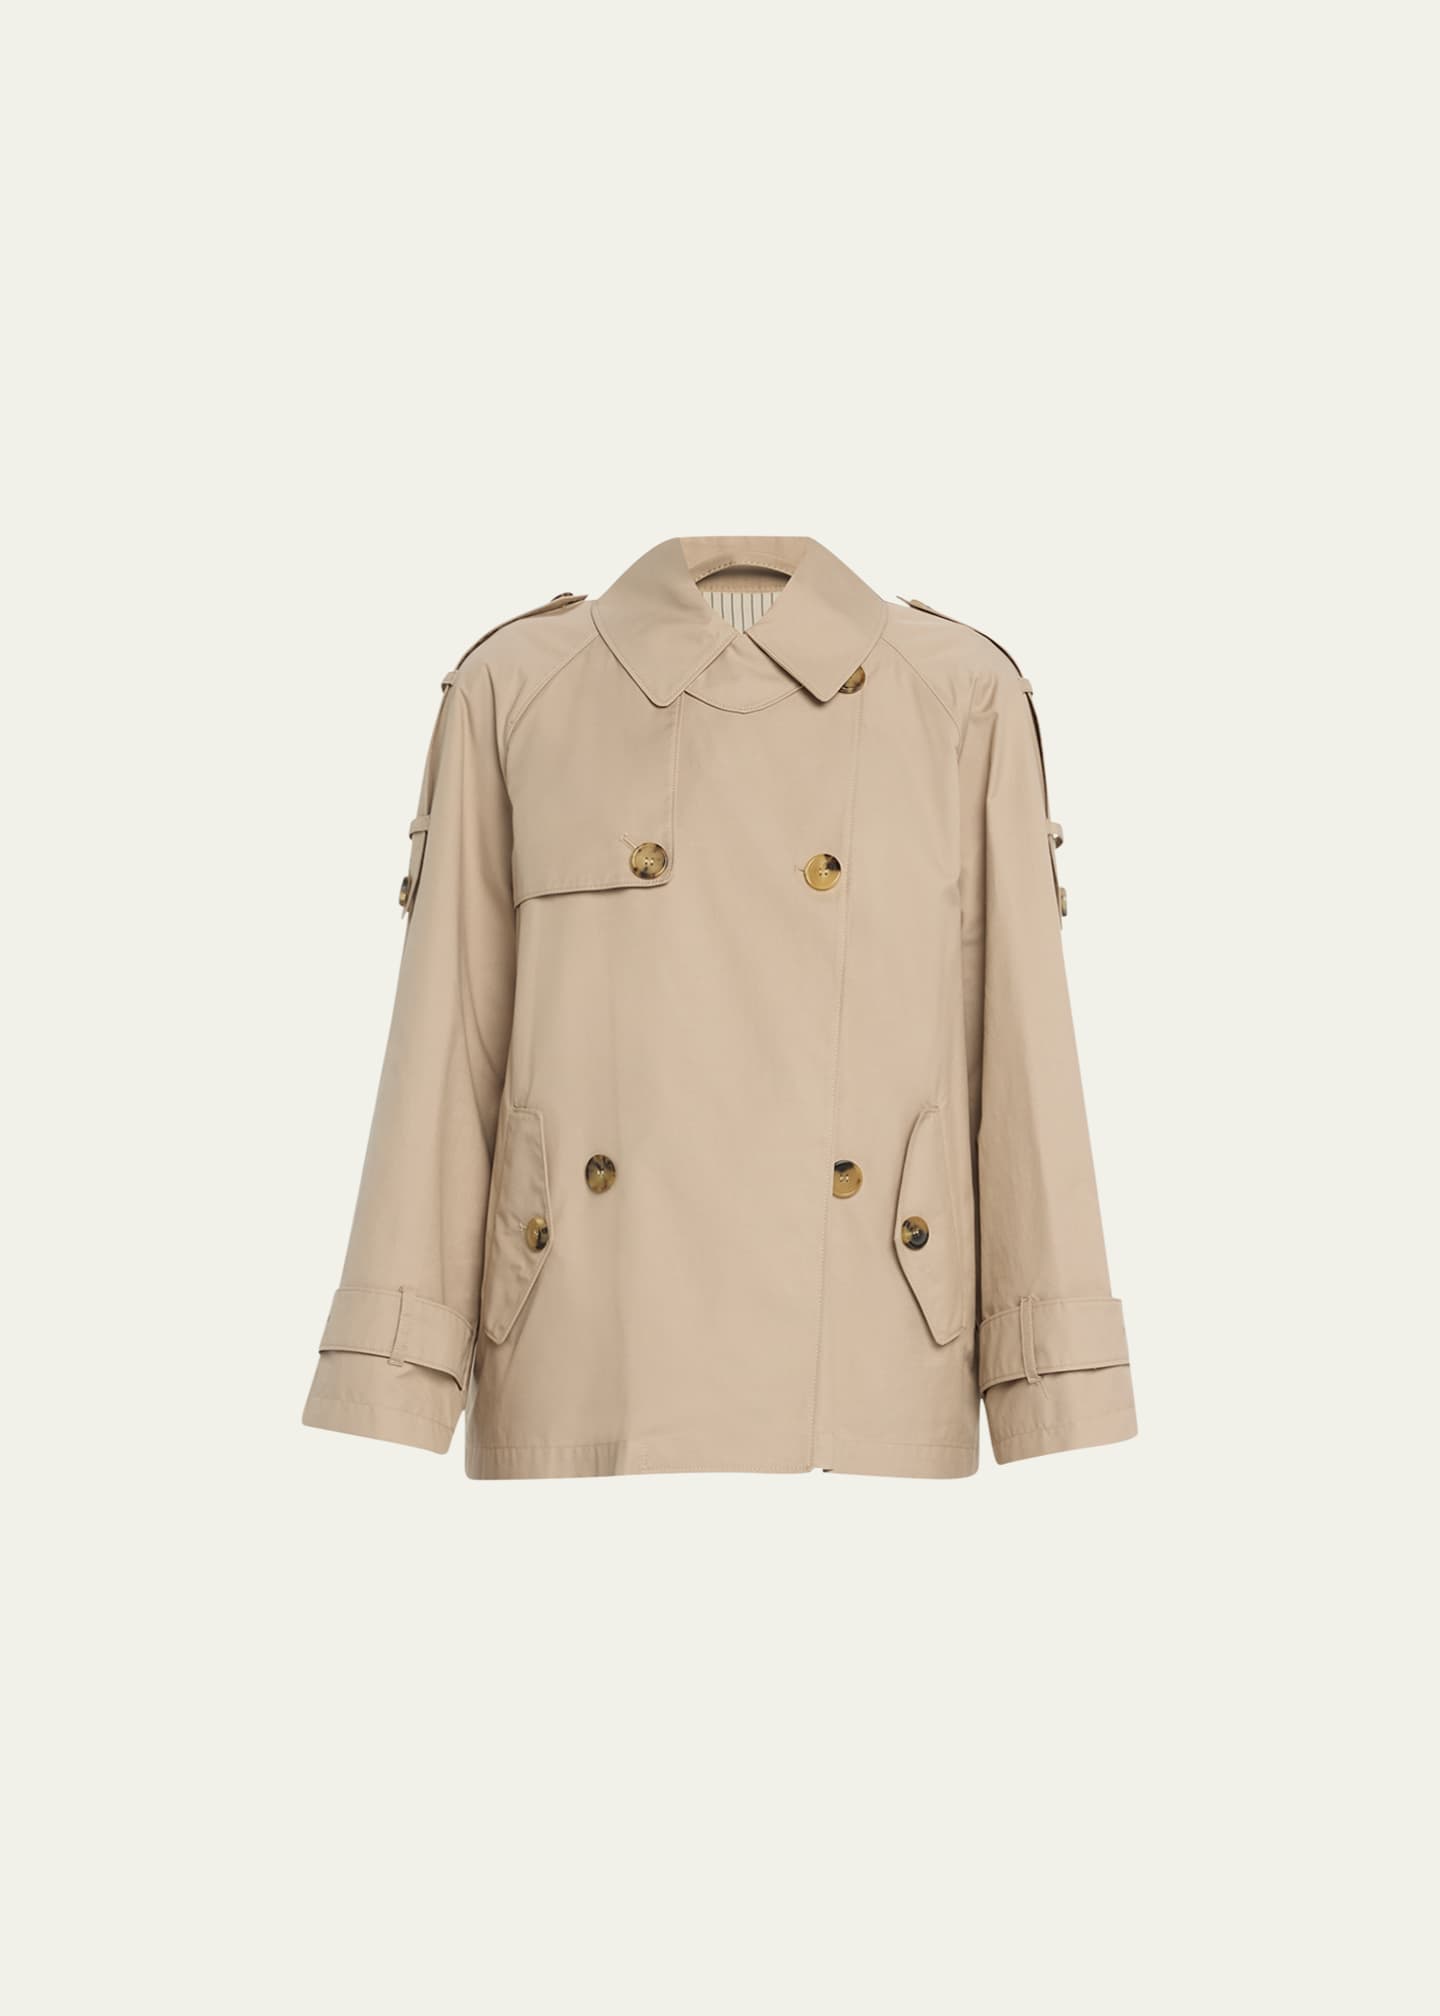 Max Mara Dtrench Double-Breasted Water-Resistant Coat - Bergdorf Goodman